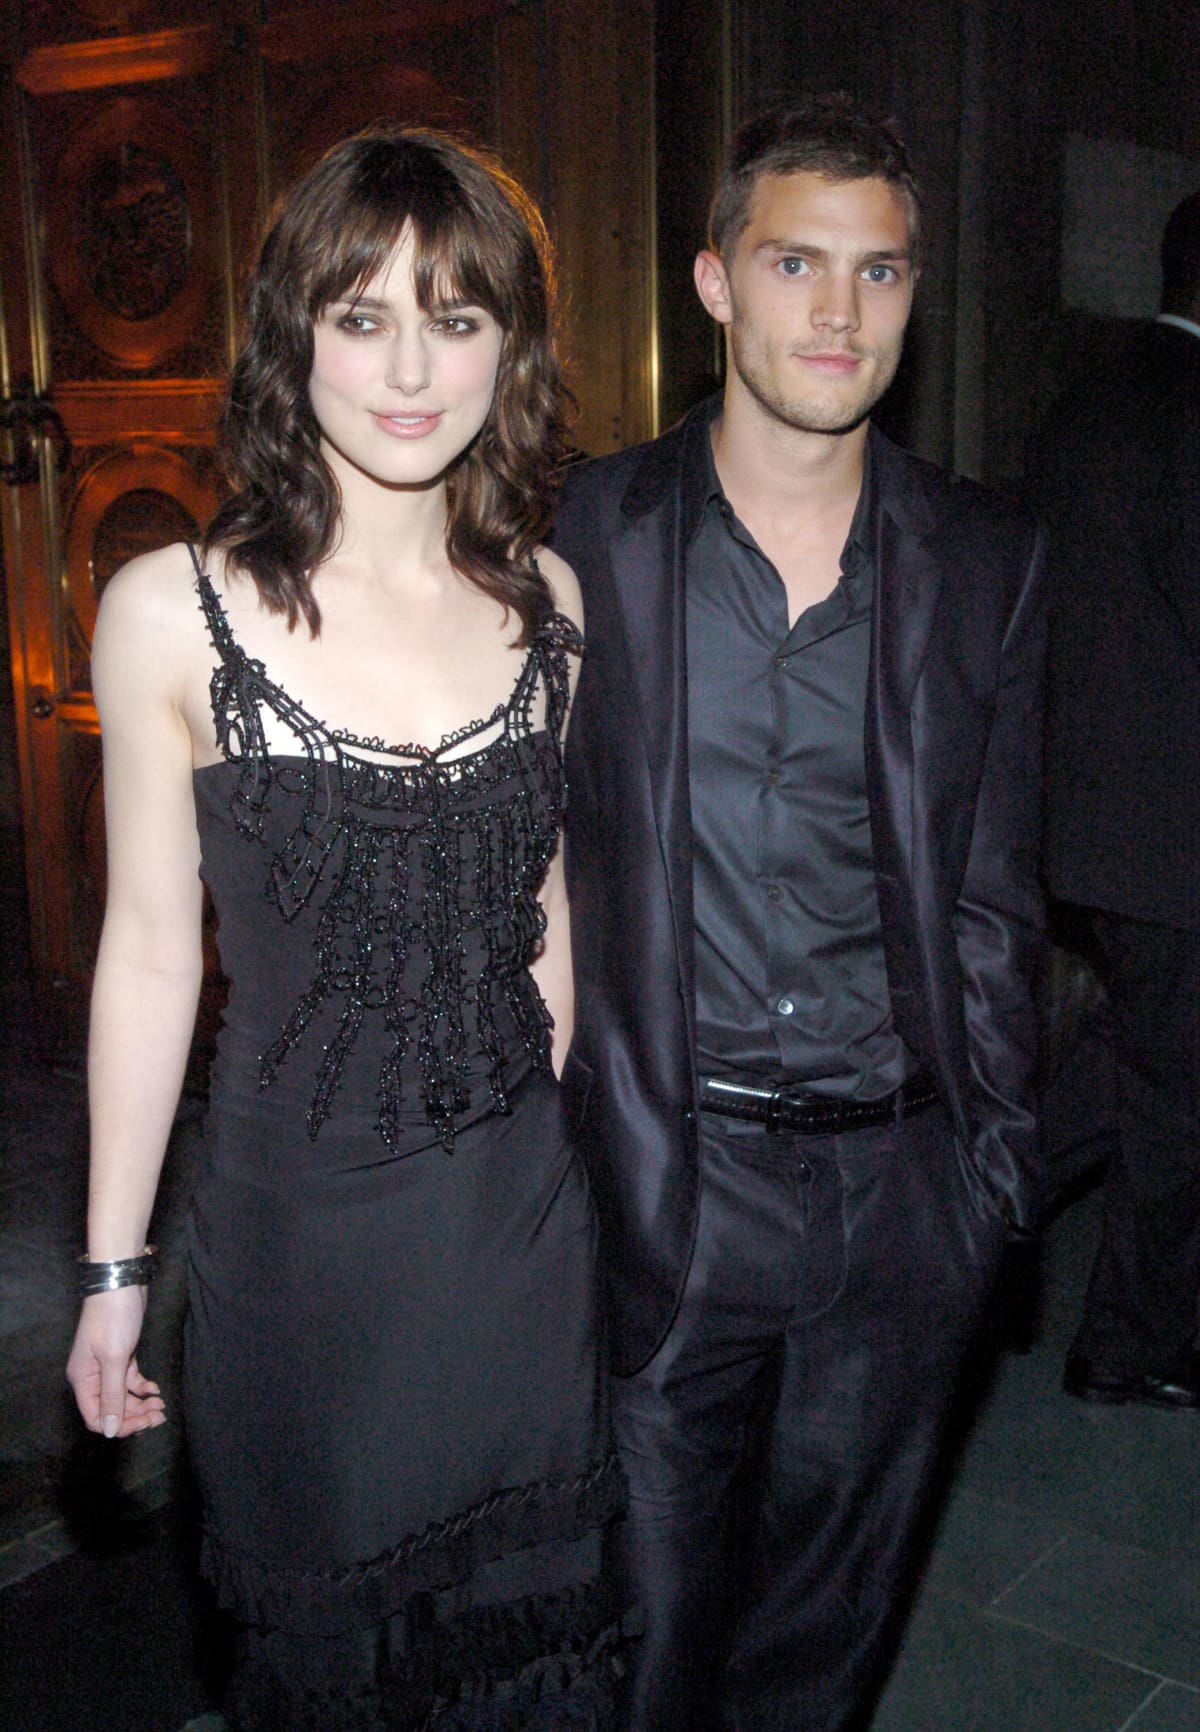 Keira Knightley with her Boyfriend Jamie Dornan during "King Arthur" New York Premiere - After Party at St. Patrick's Cathedral in New York City, New York, United States. (Photo by Dimitrios Kambouris/WireImage)